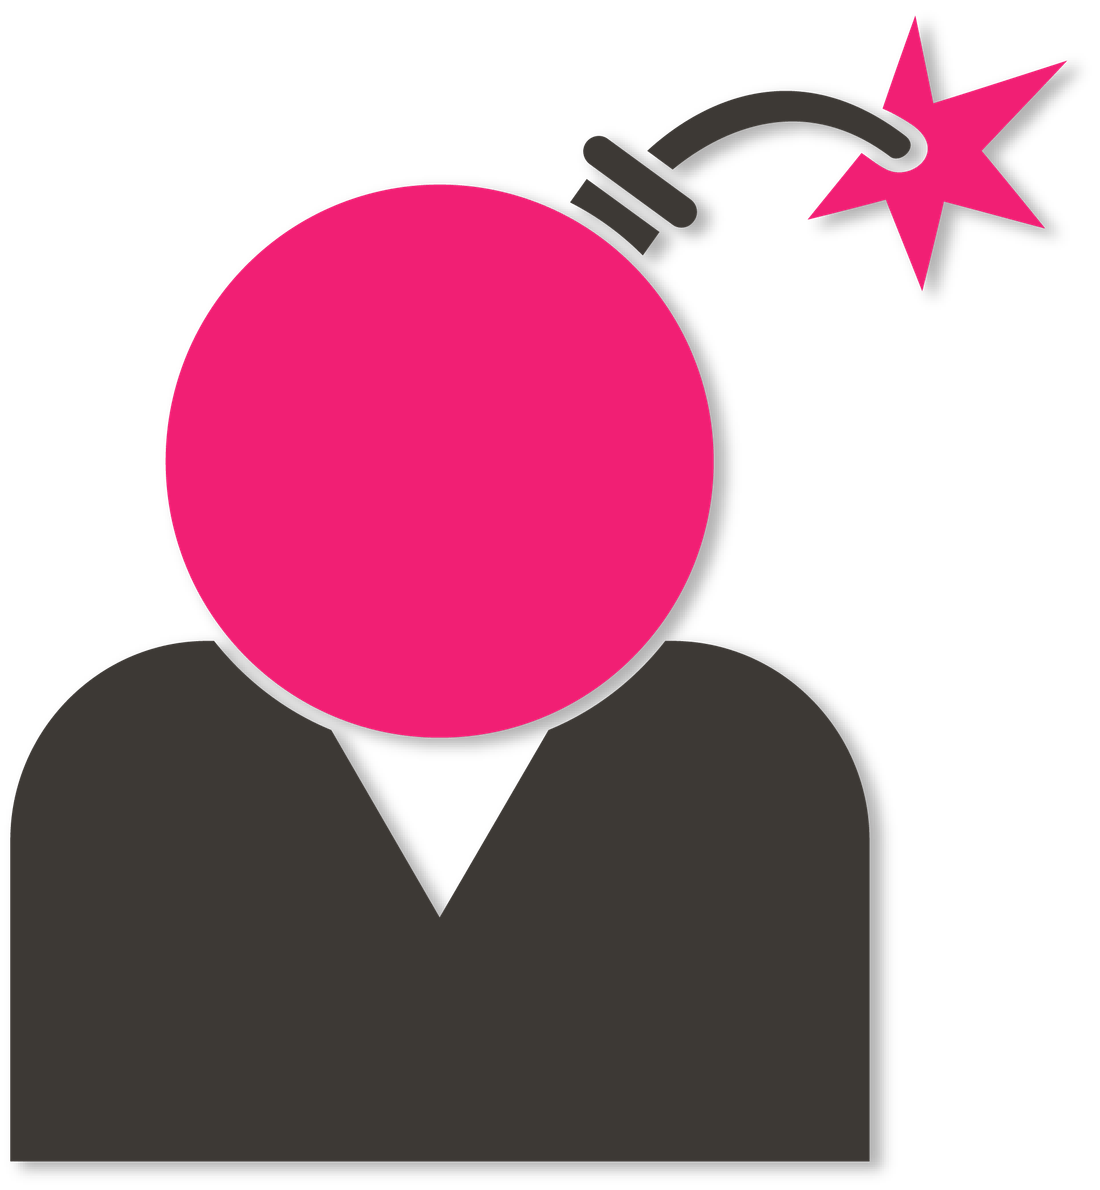 Icon showing a pink person with a bomb for a head